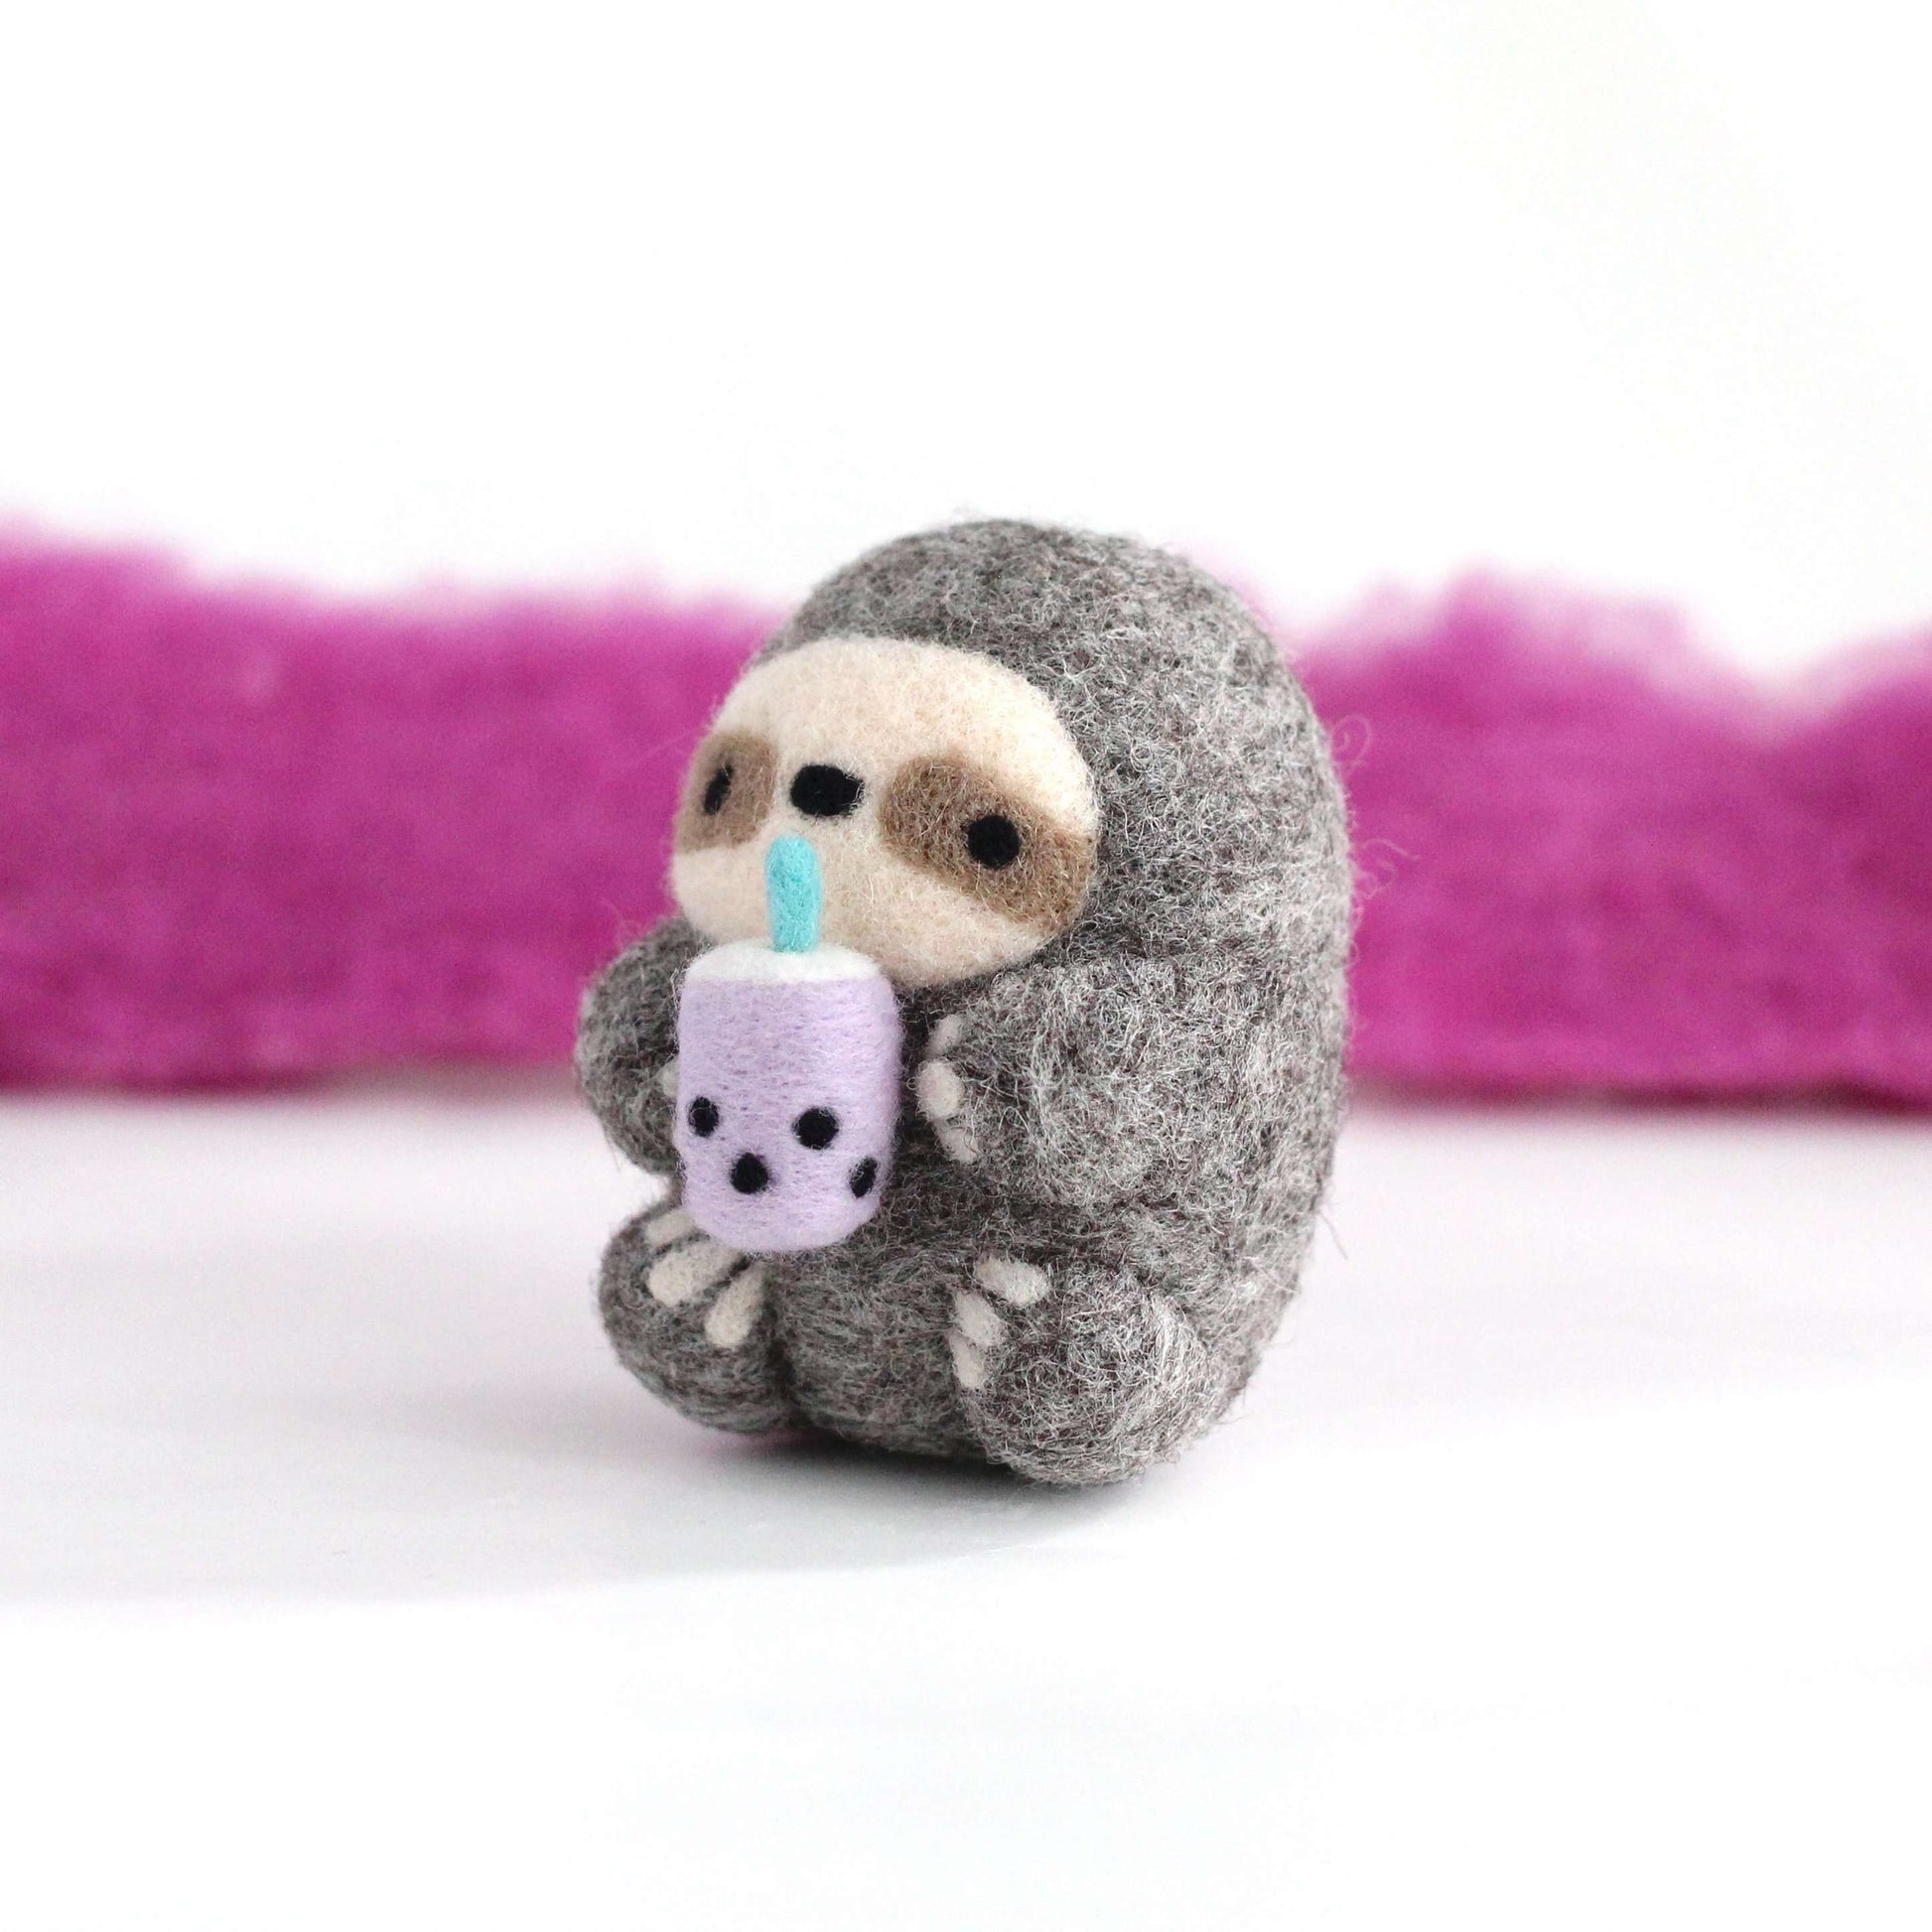 Needle Felted Sloth holding Bubble Tea by Wild Whimsy Woolies